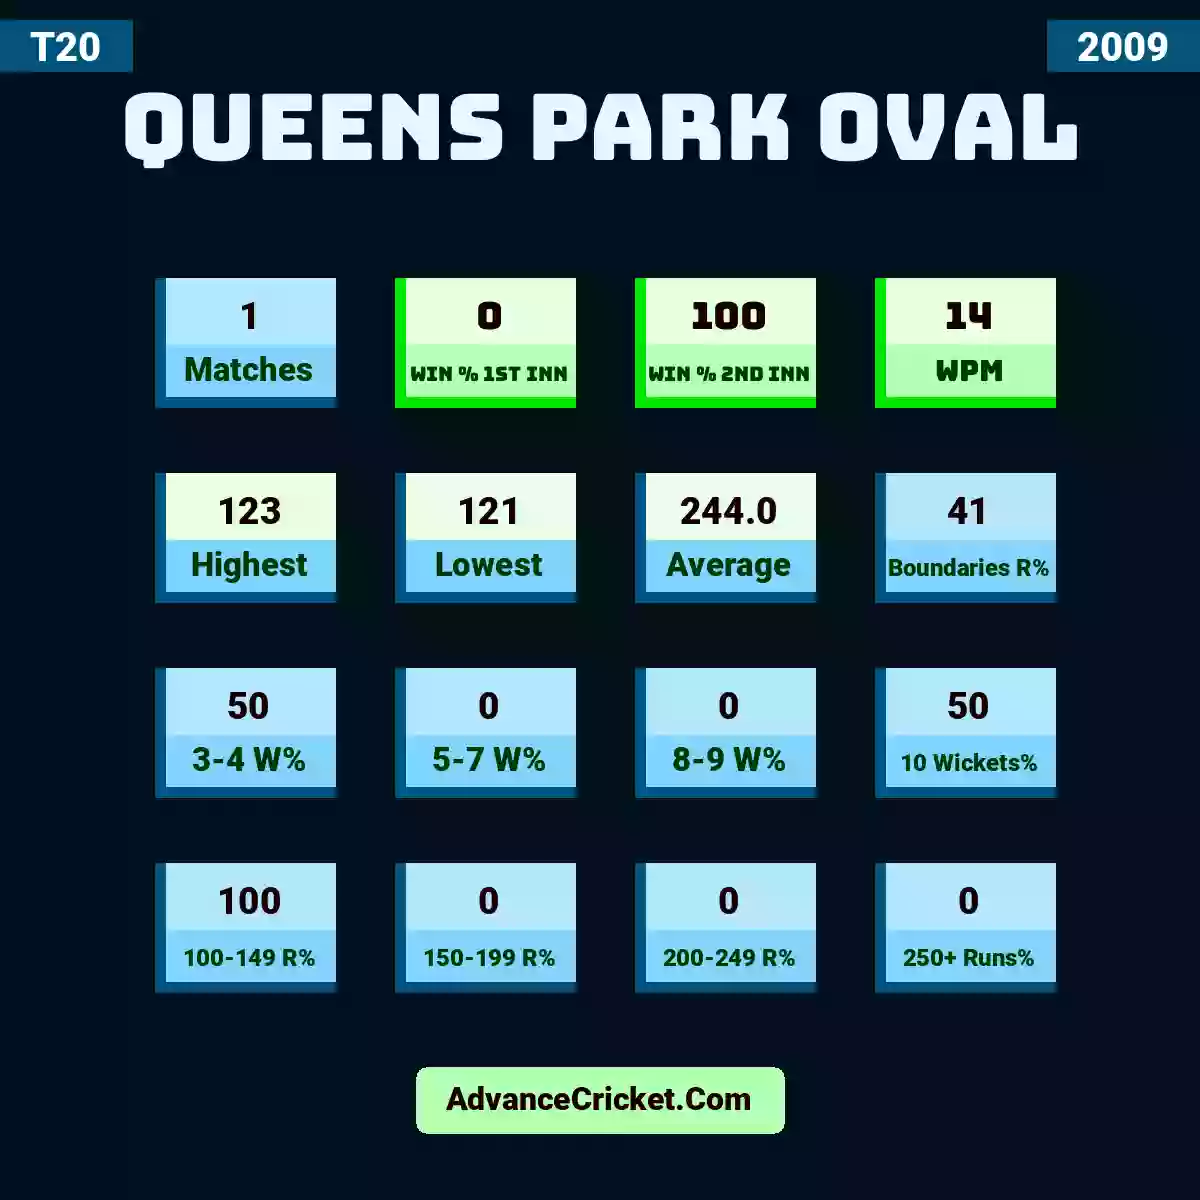 Image showing Queens Park Oval with Matches: 1, Win % 1st Inn: 0, Win % 2nd Inn: 100, WPM: 14, Highest: 123, Lowest: 121, Average: 244.0, Boundaries R%: 41, 3-4 W%: 50, 5-7 W%: 0, 8-9 W%: 0, 10 Wickets%: 50, 100-149 R%: 100, 150-199 R%: 0, 200-249 R%: 0, 250+ Runs%: 0.